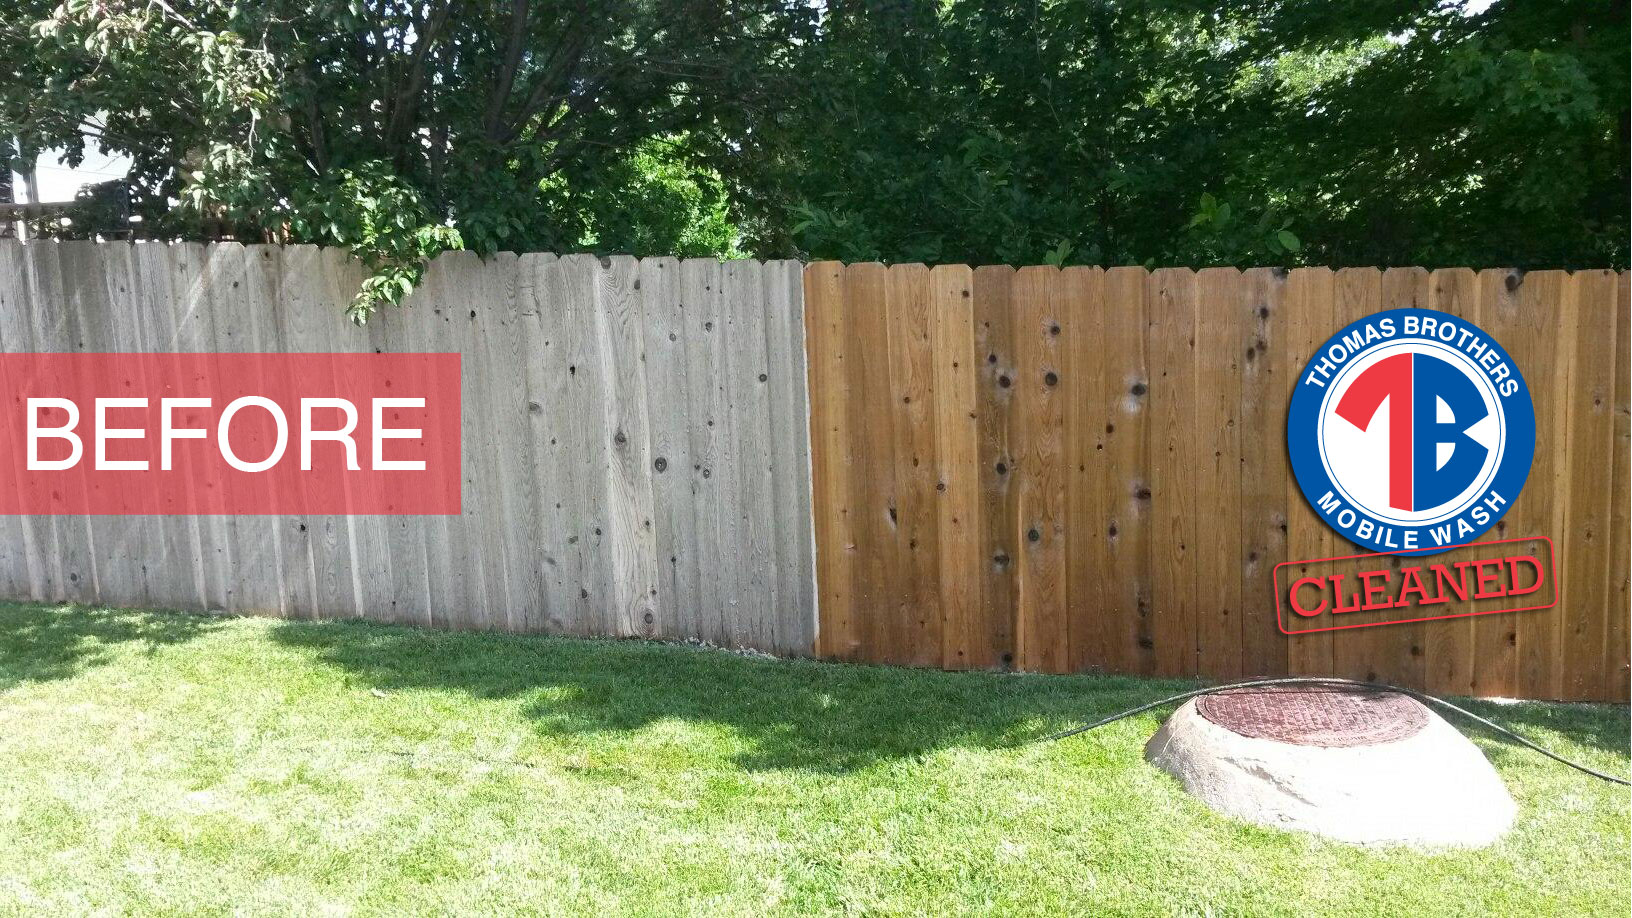 powerwashed-fence-before-after-thomasbrothers.jpg